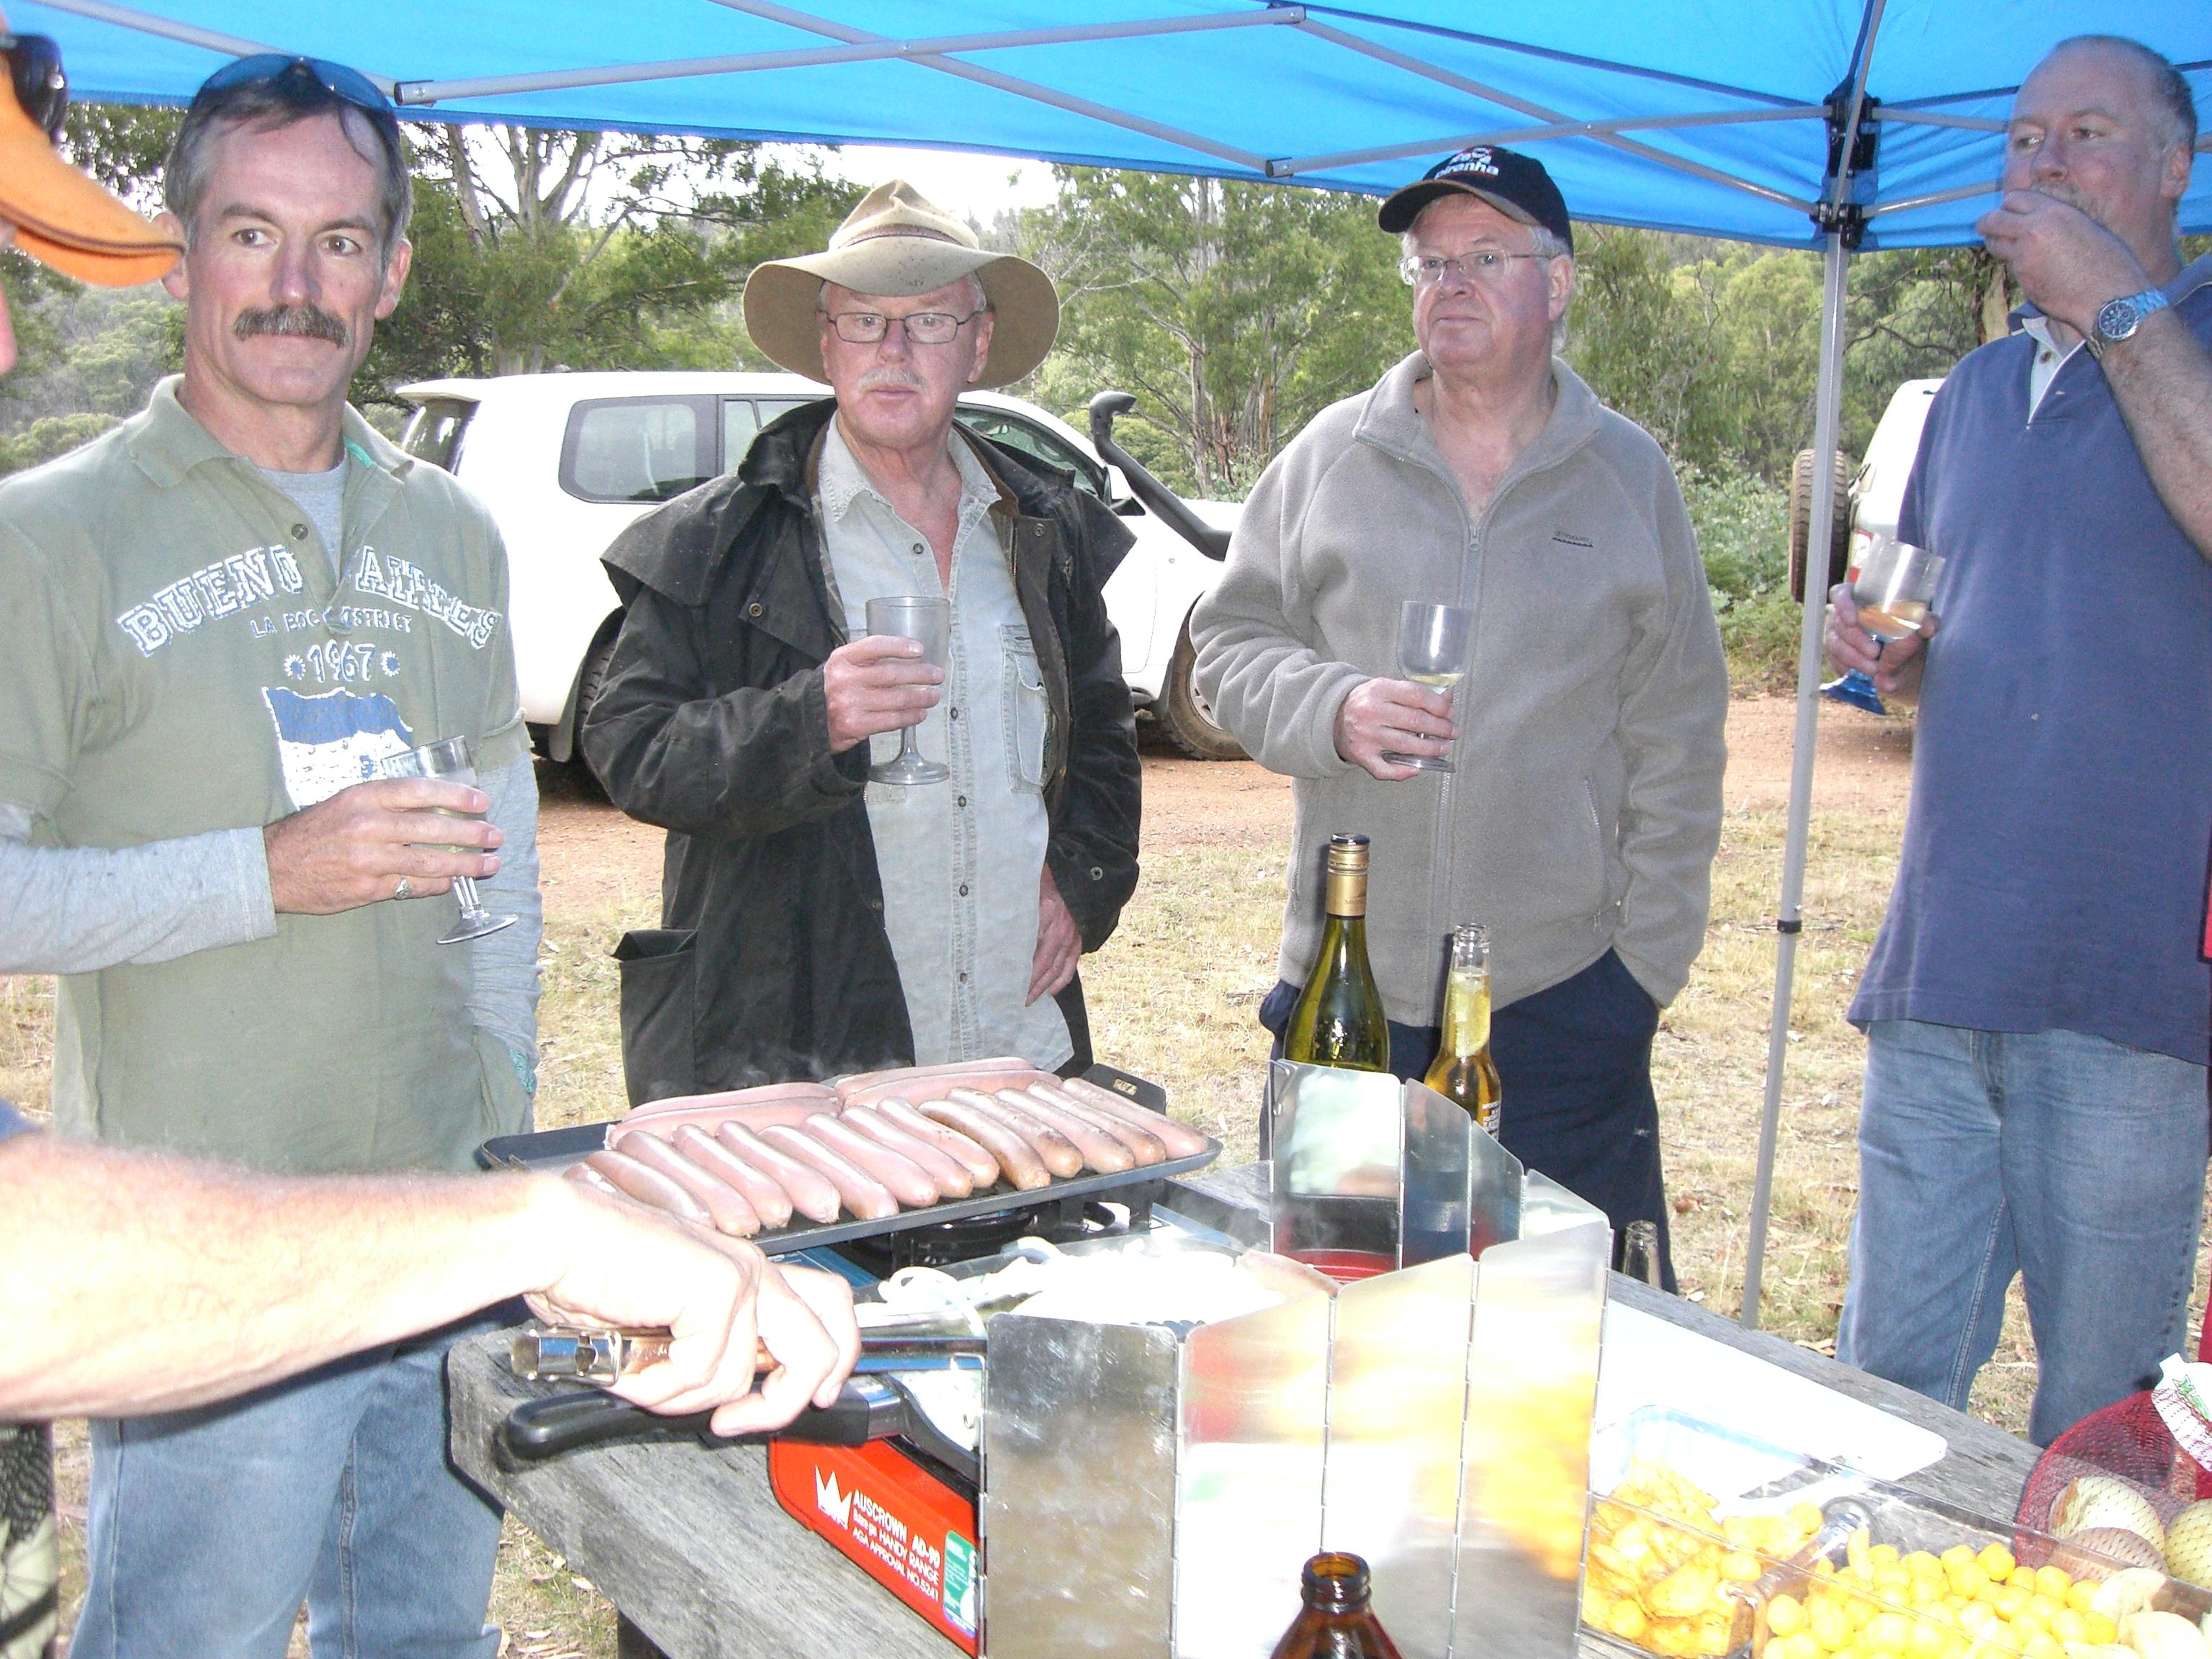 Sausage sizzle Grant-style